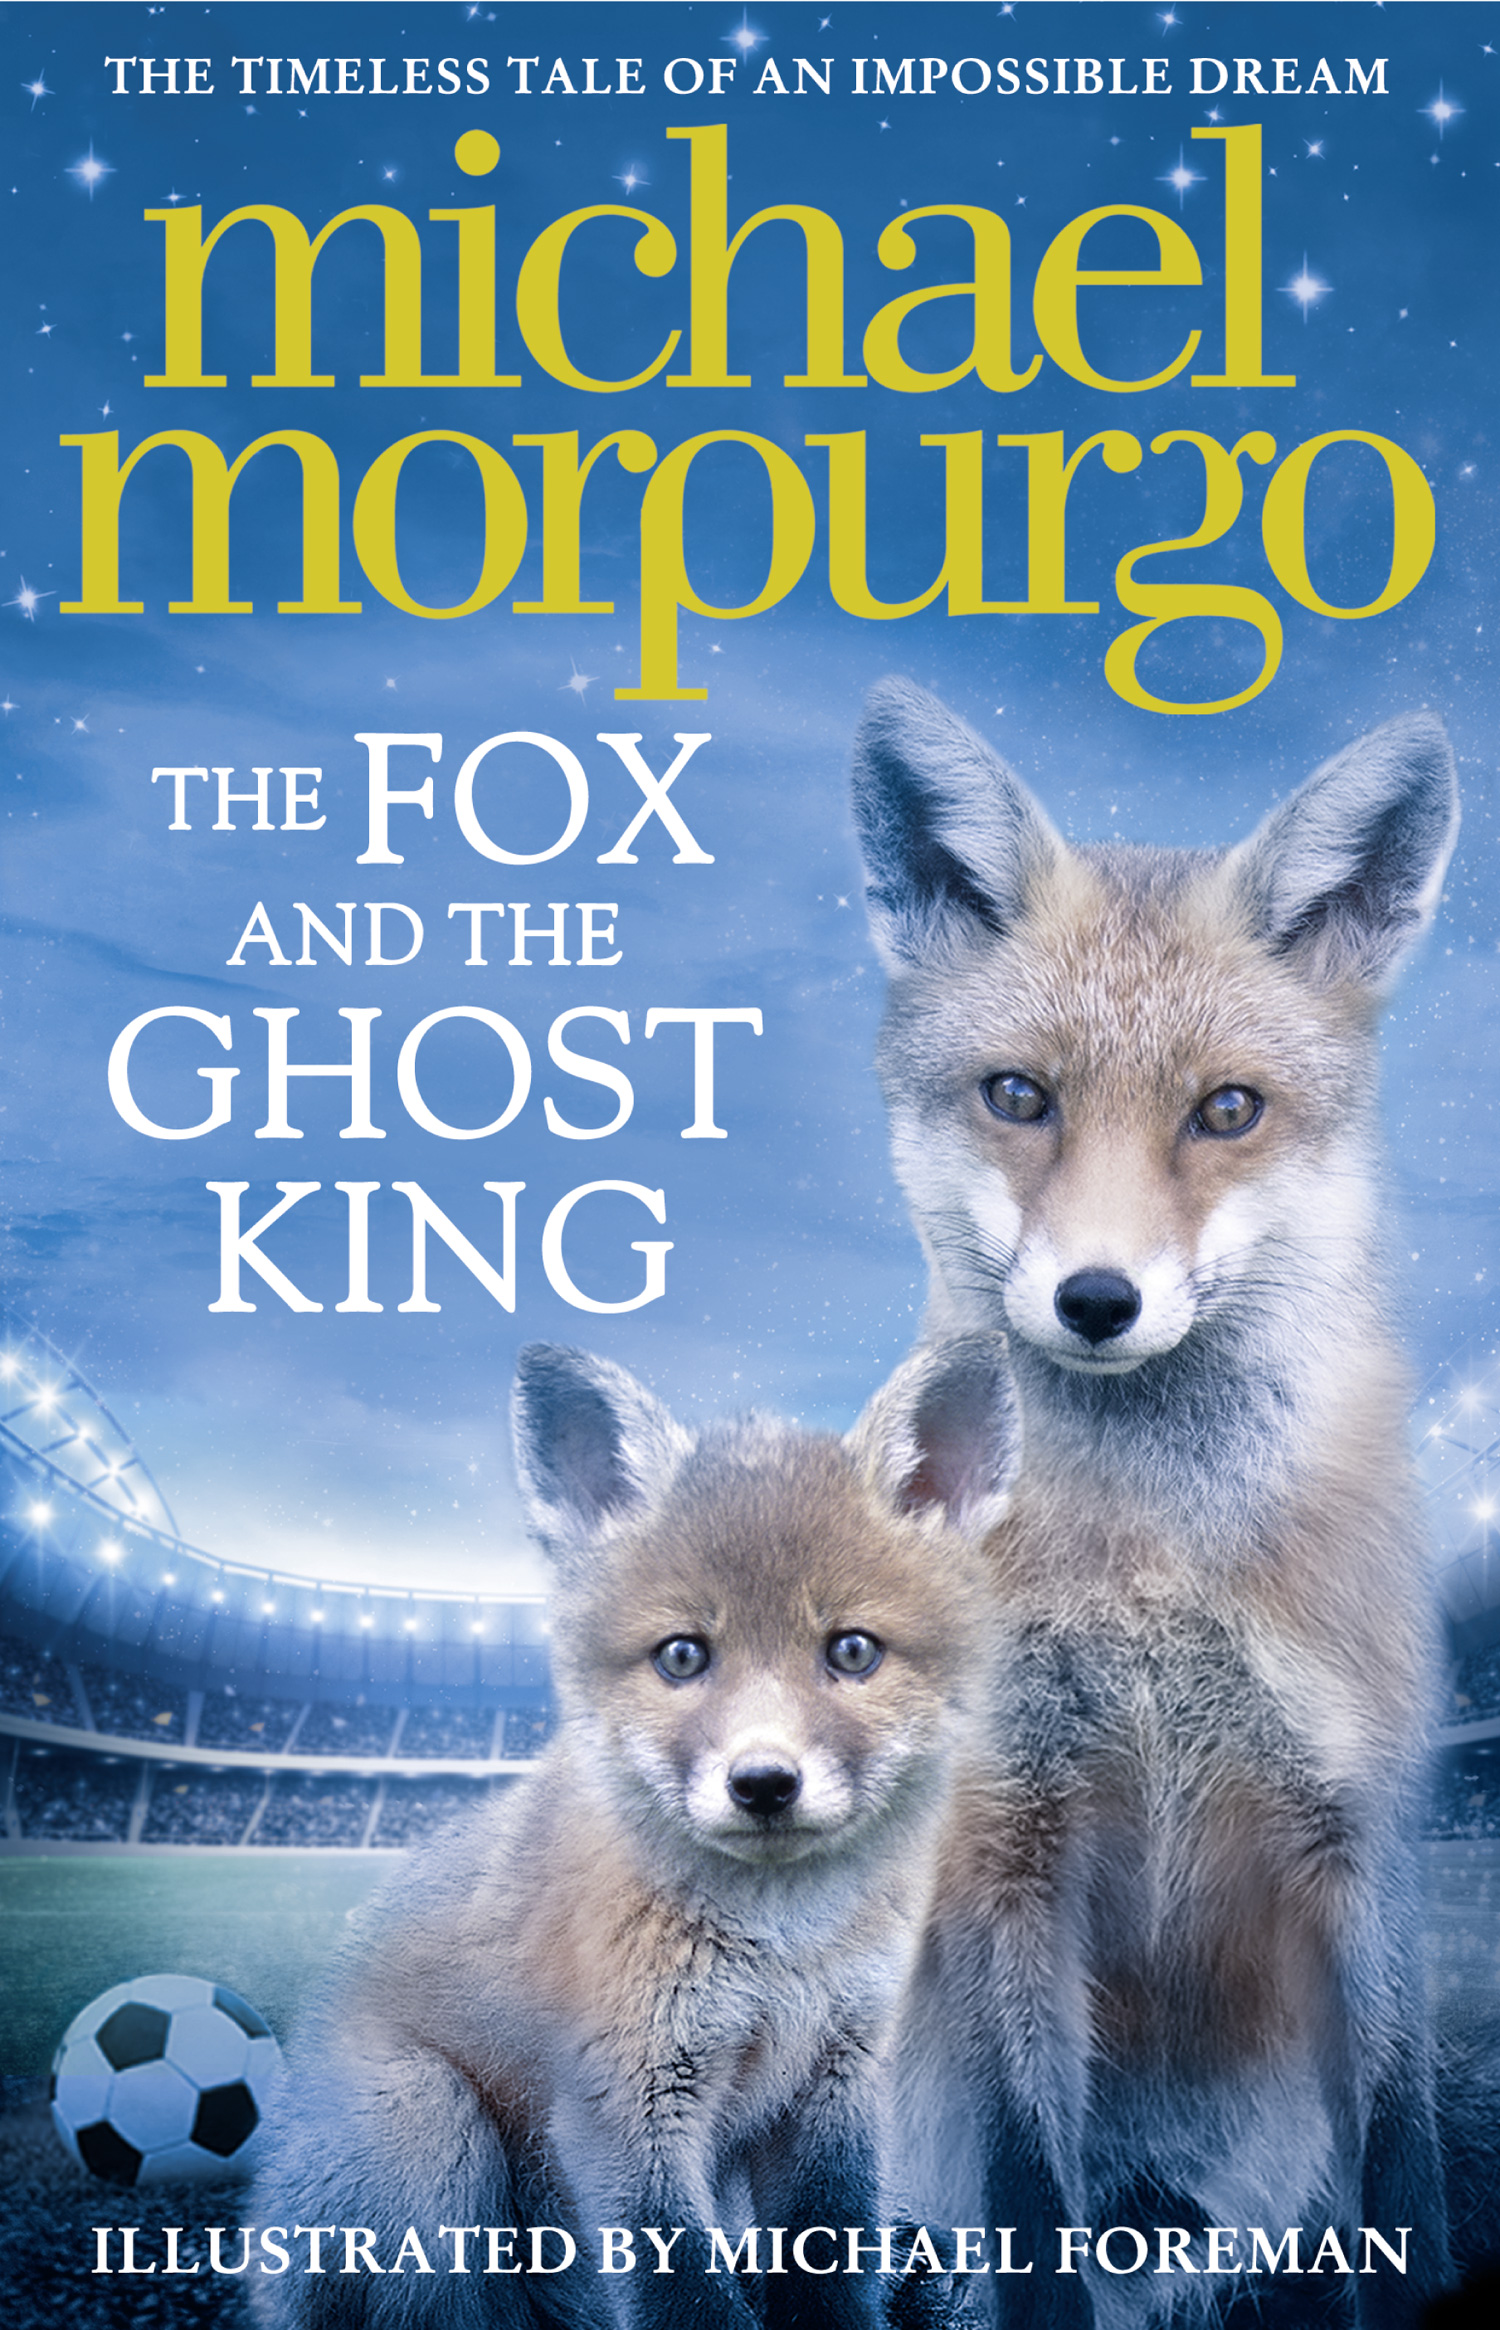 The Fox and the Ghost King by Michael Morpurgo